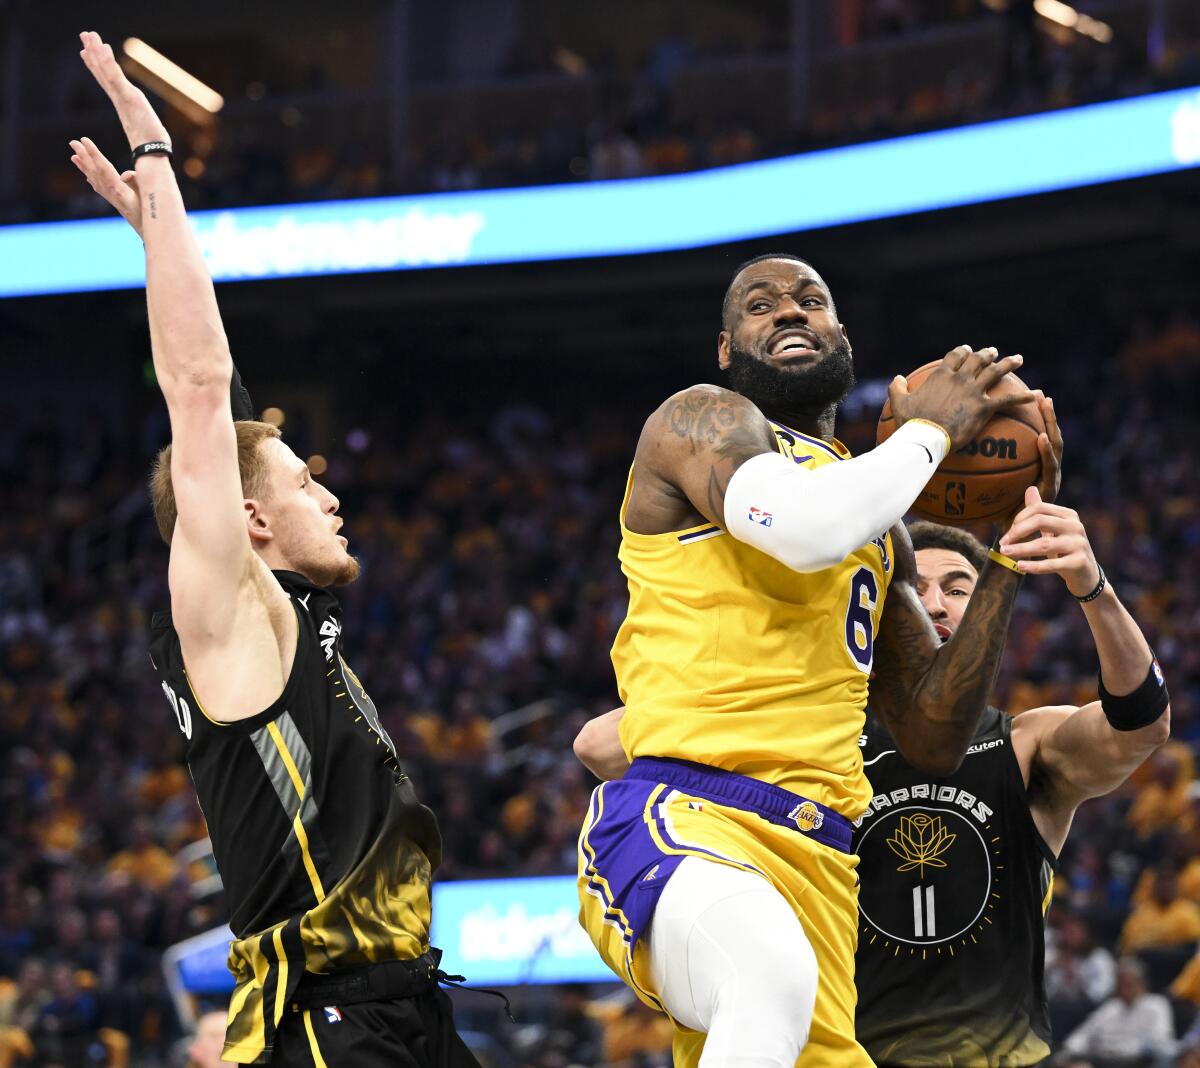 Lakers forward LeBron James, center, elevates for a layup against Warriors guards Donte DiVincenzo, left, and Klay Thompson.